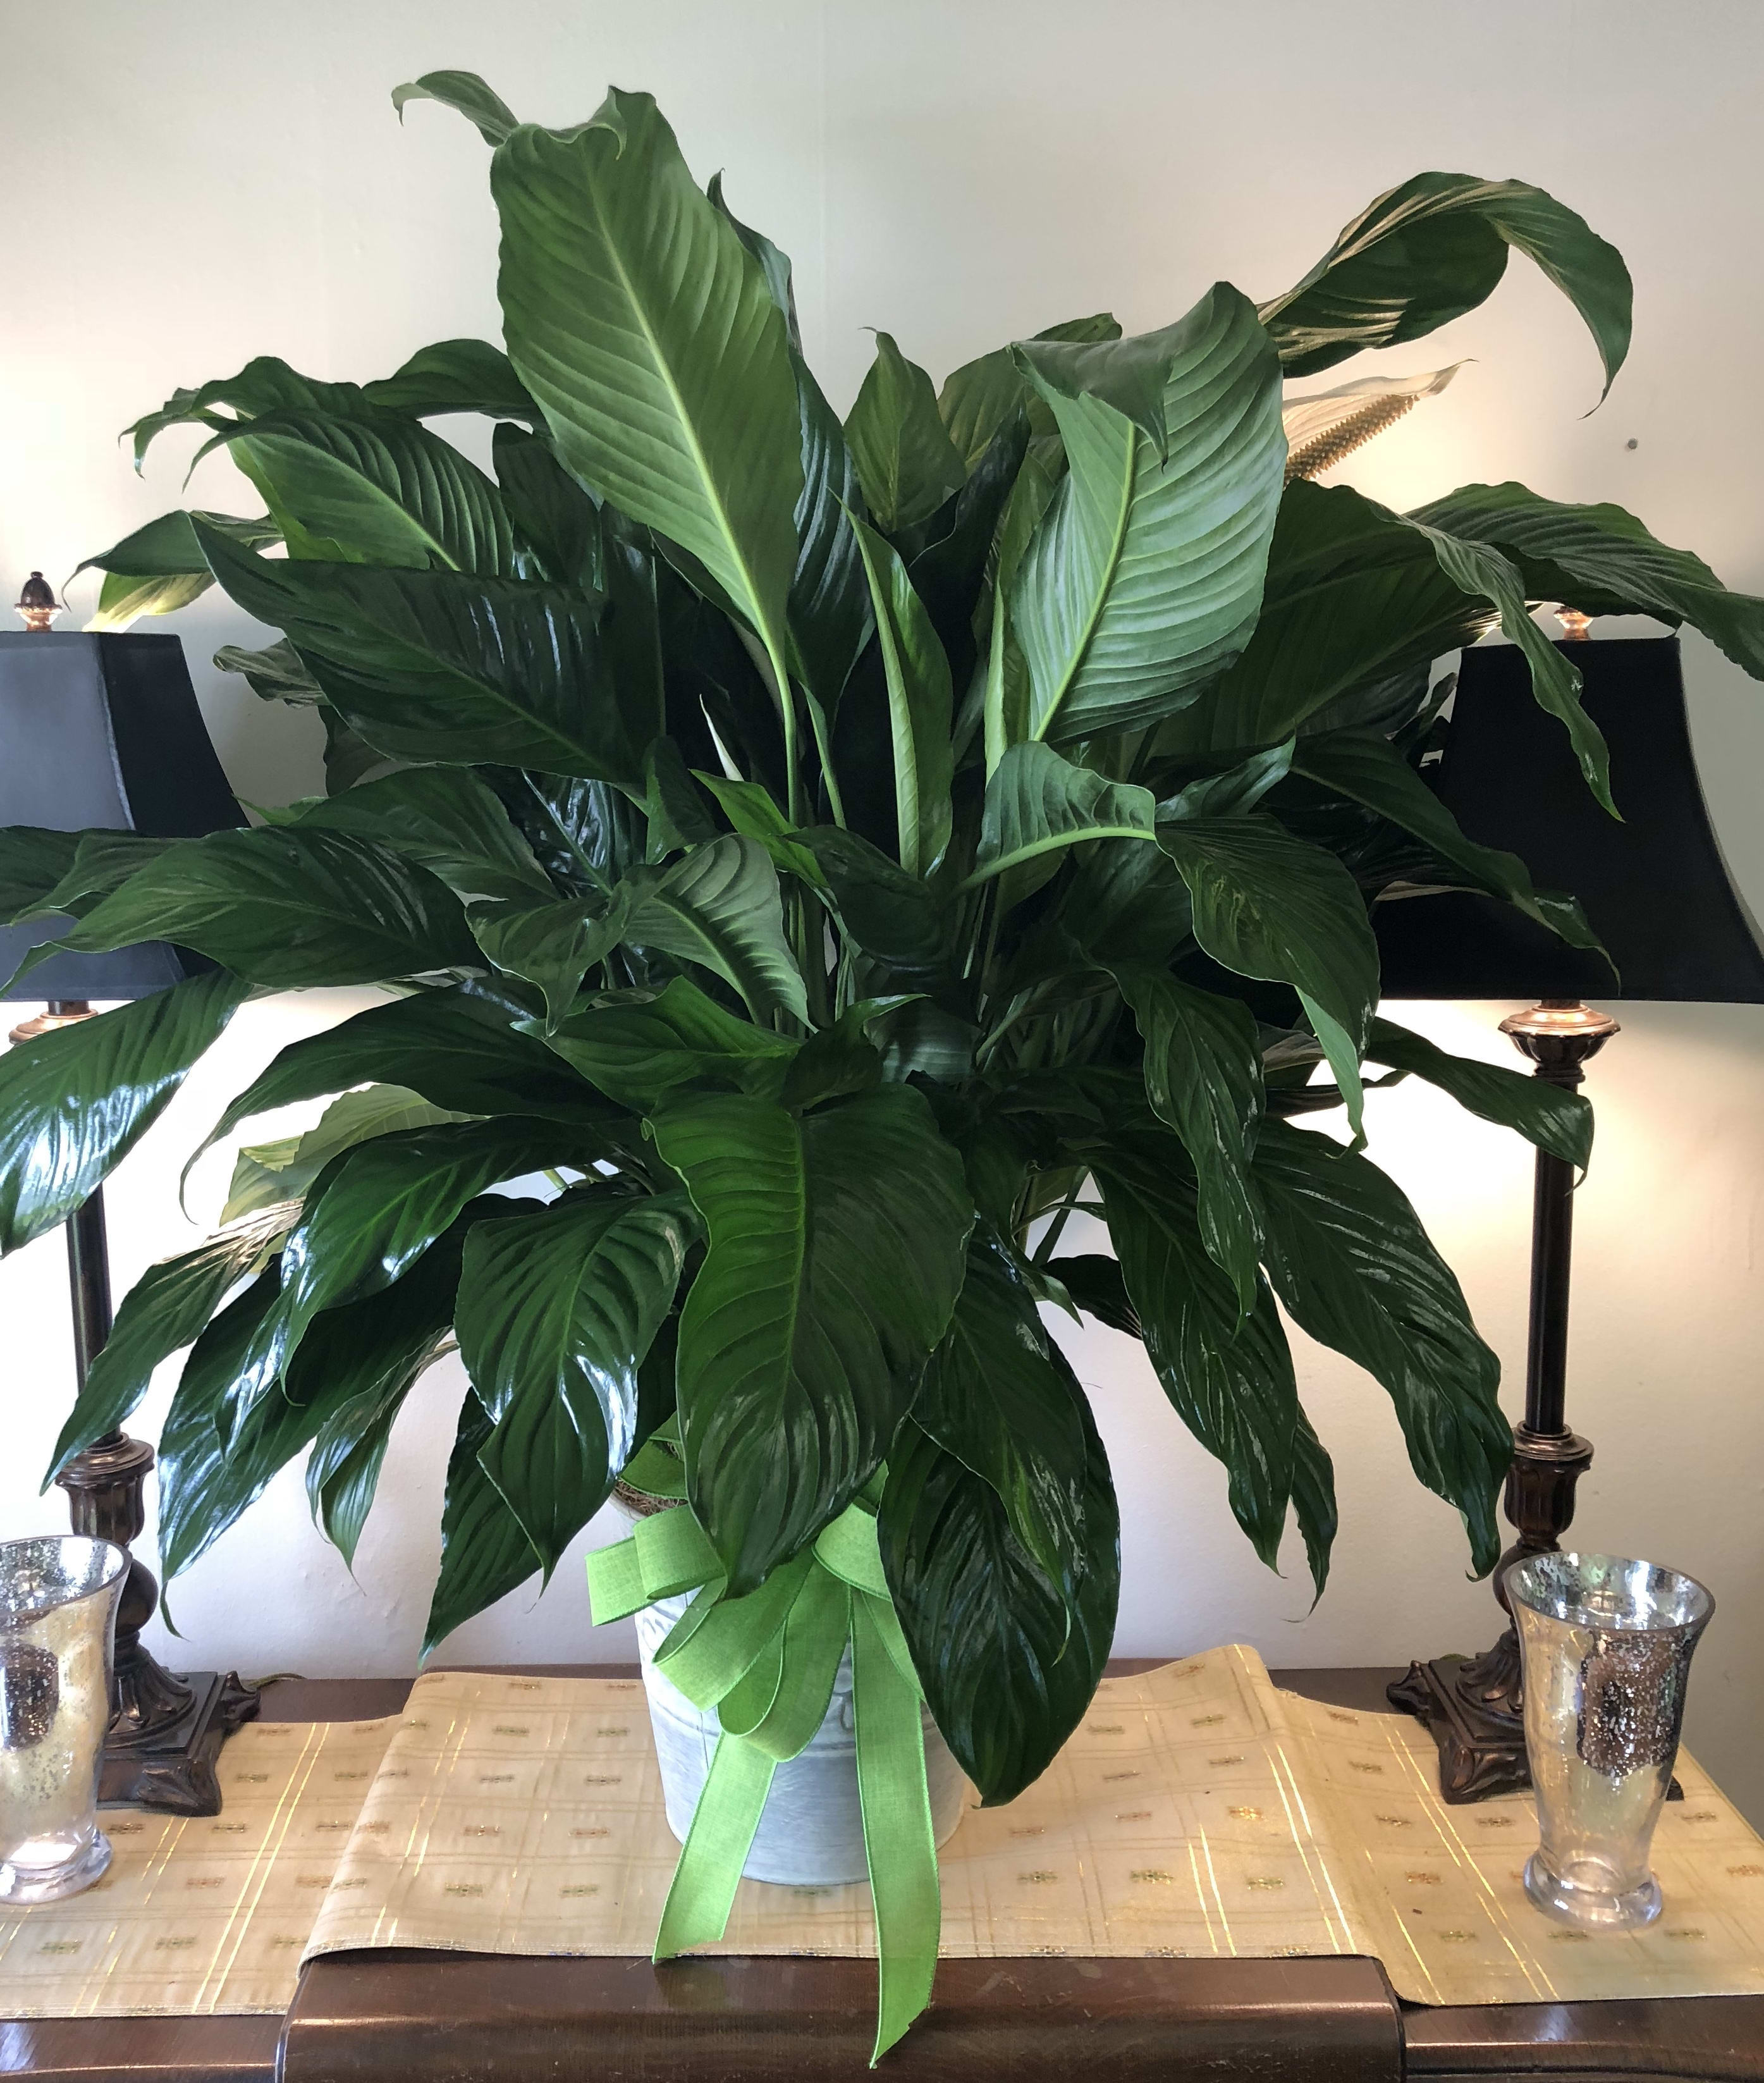 Large peace Lily comfort planter - Large peace Lily comfort planter Beautiful large 10 inch peace lilies in a metal container. Approximate size 42 to 46 inches tall